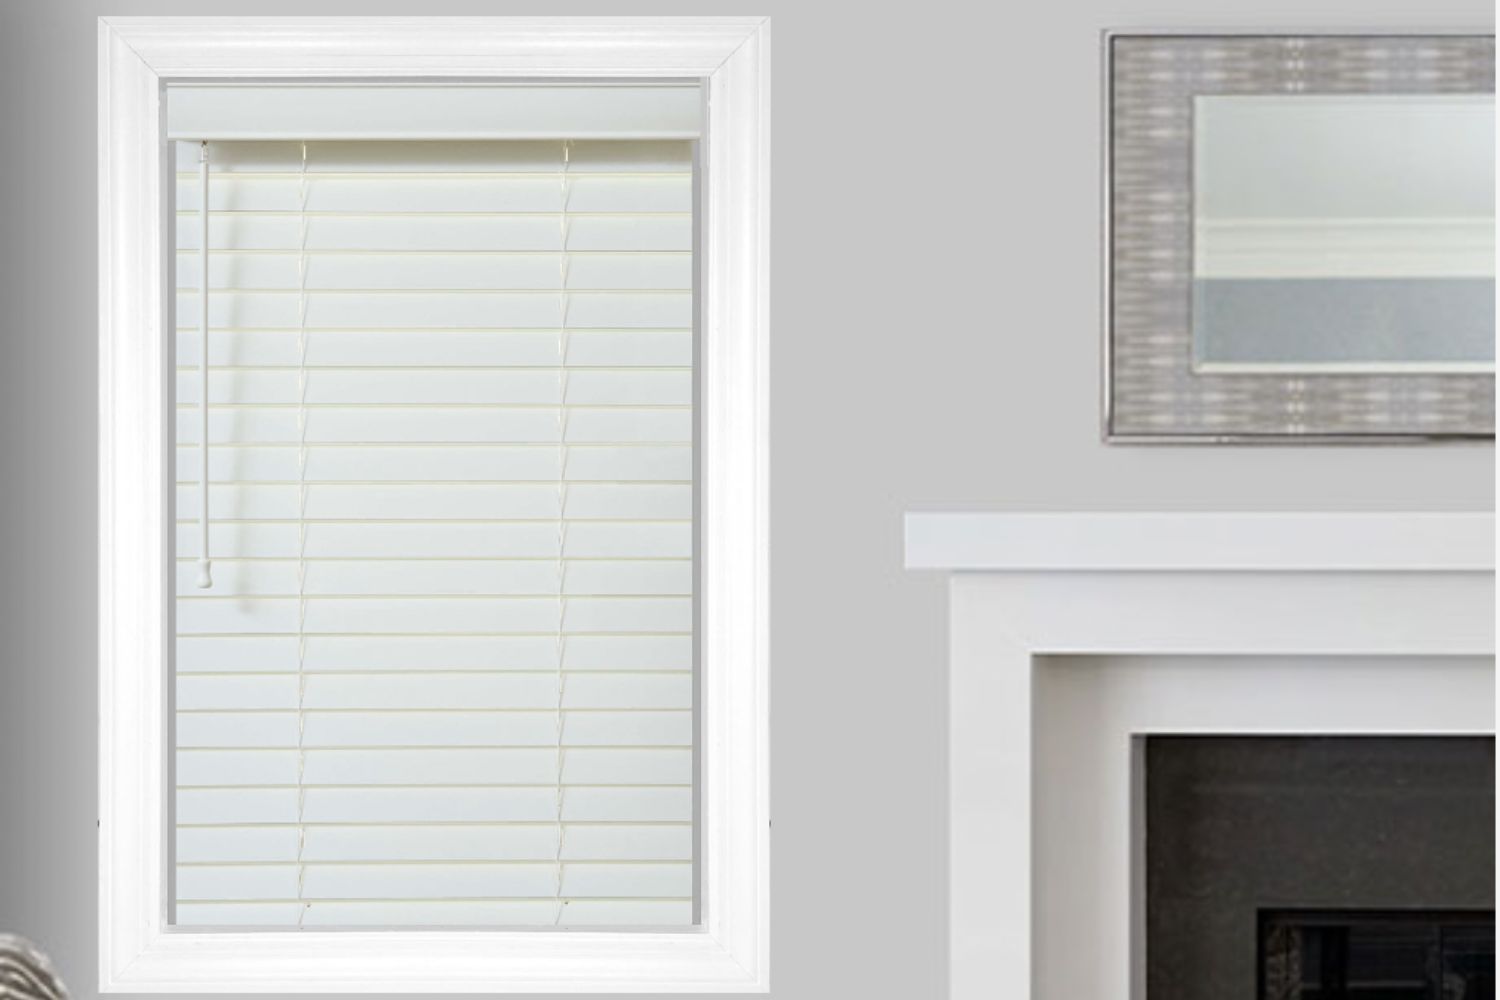 The Best Places to Buy Blinds Online Option: Blinds To Go